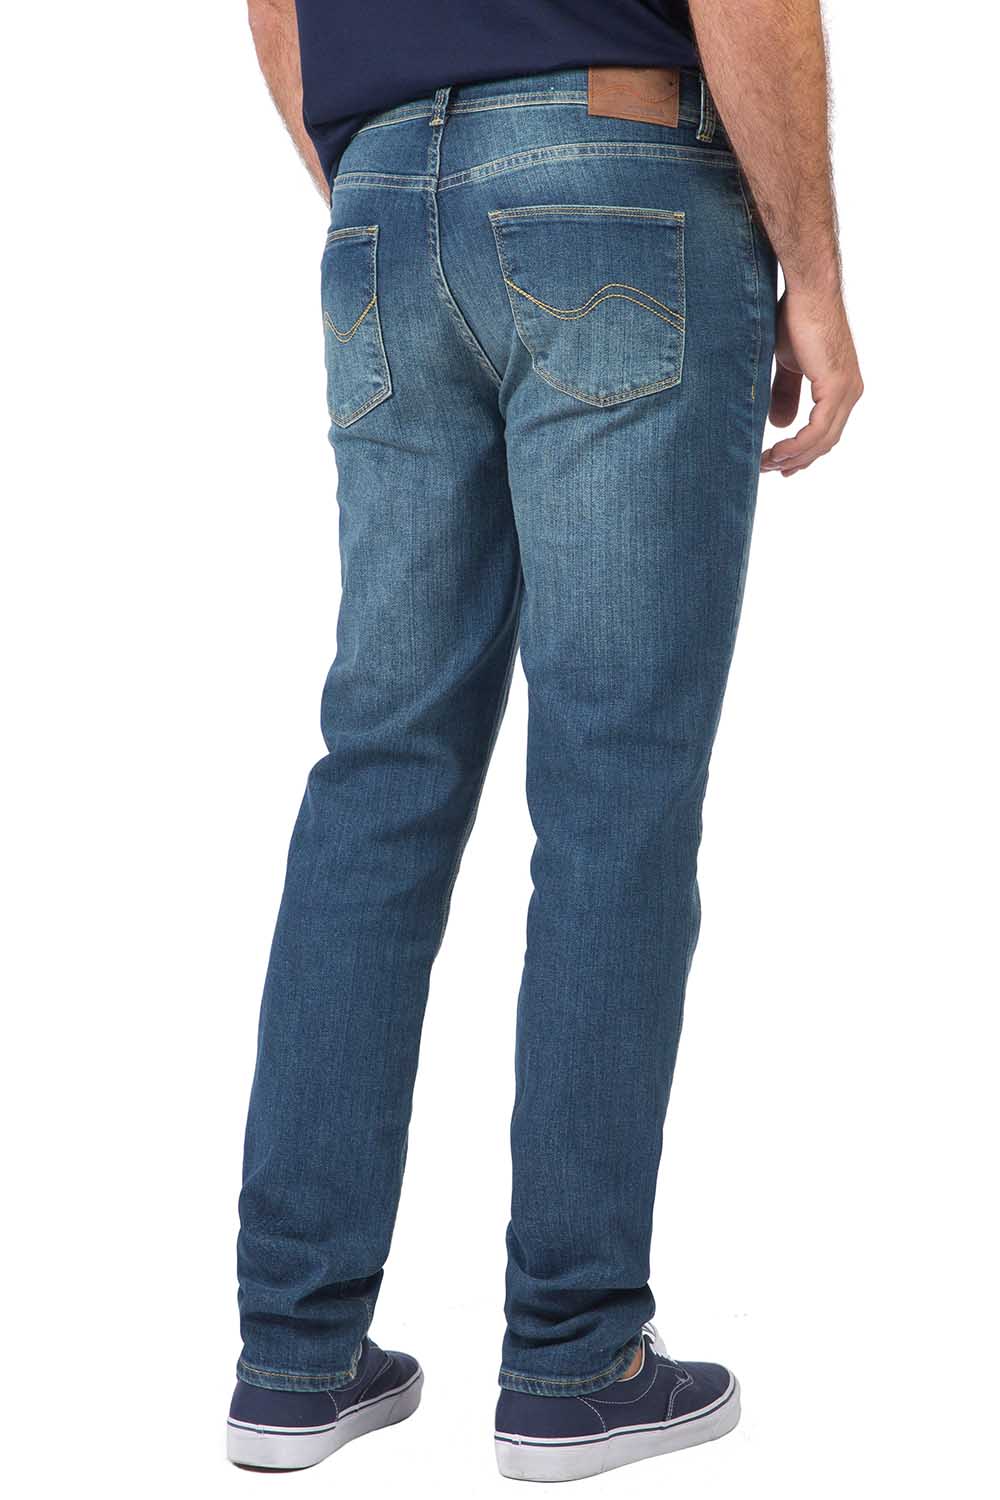 jeans masculinos